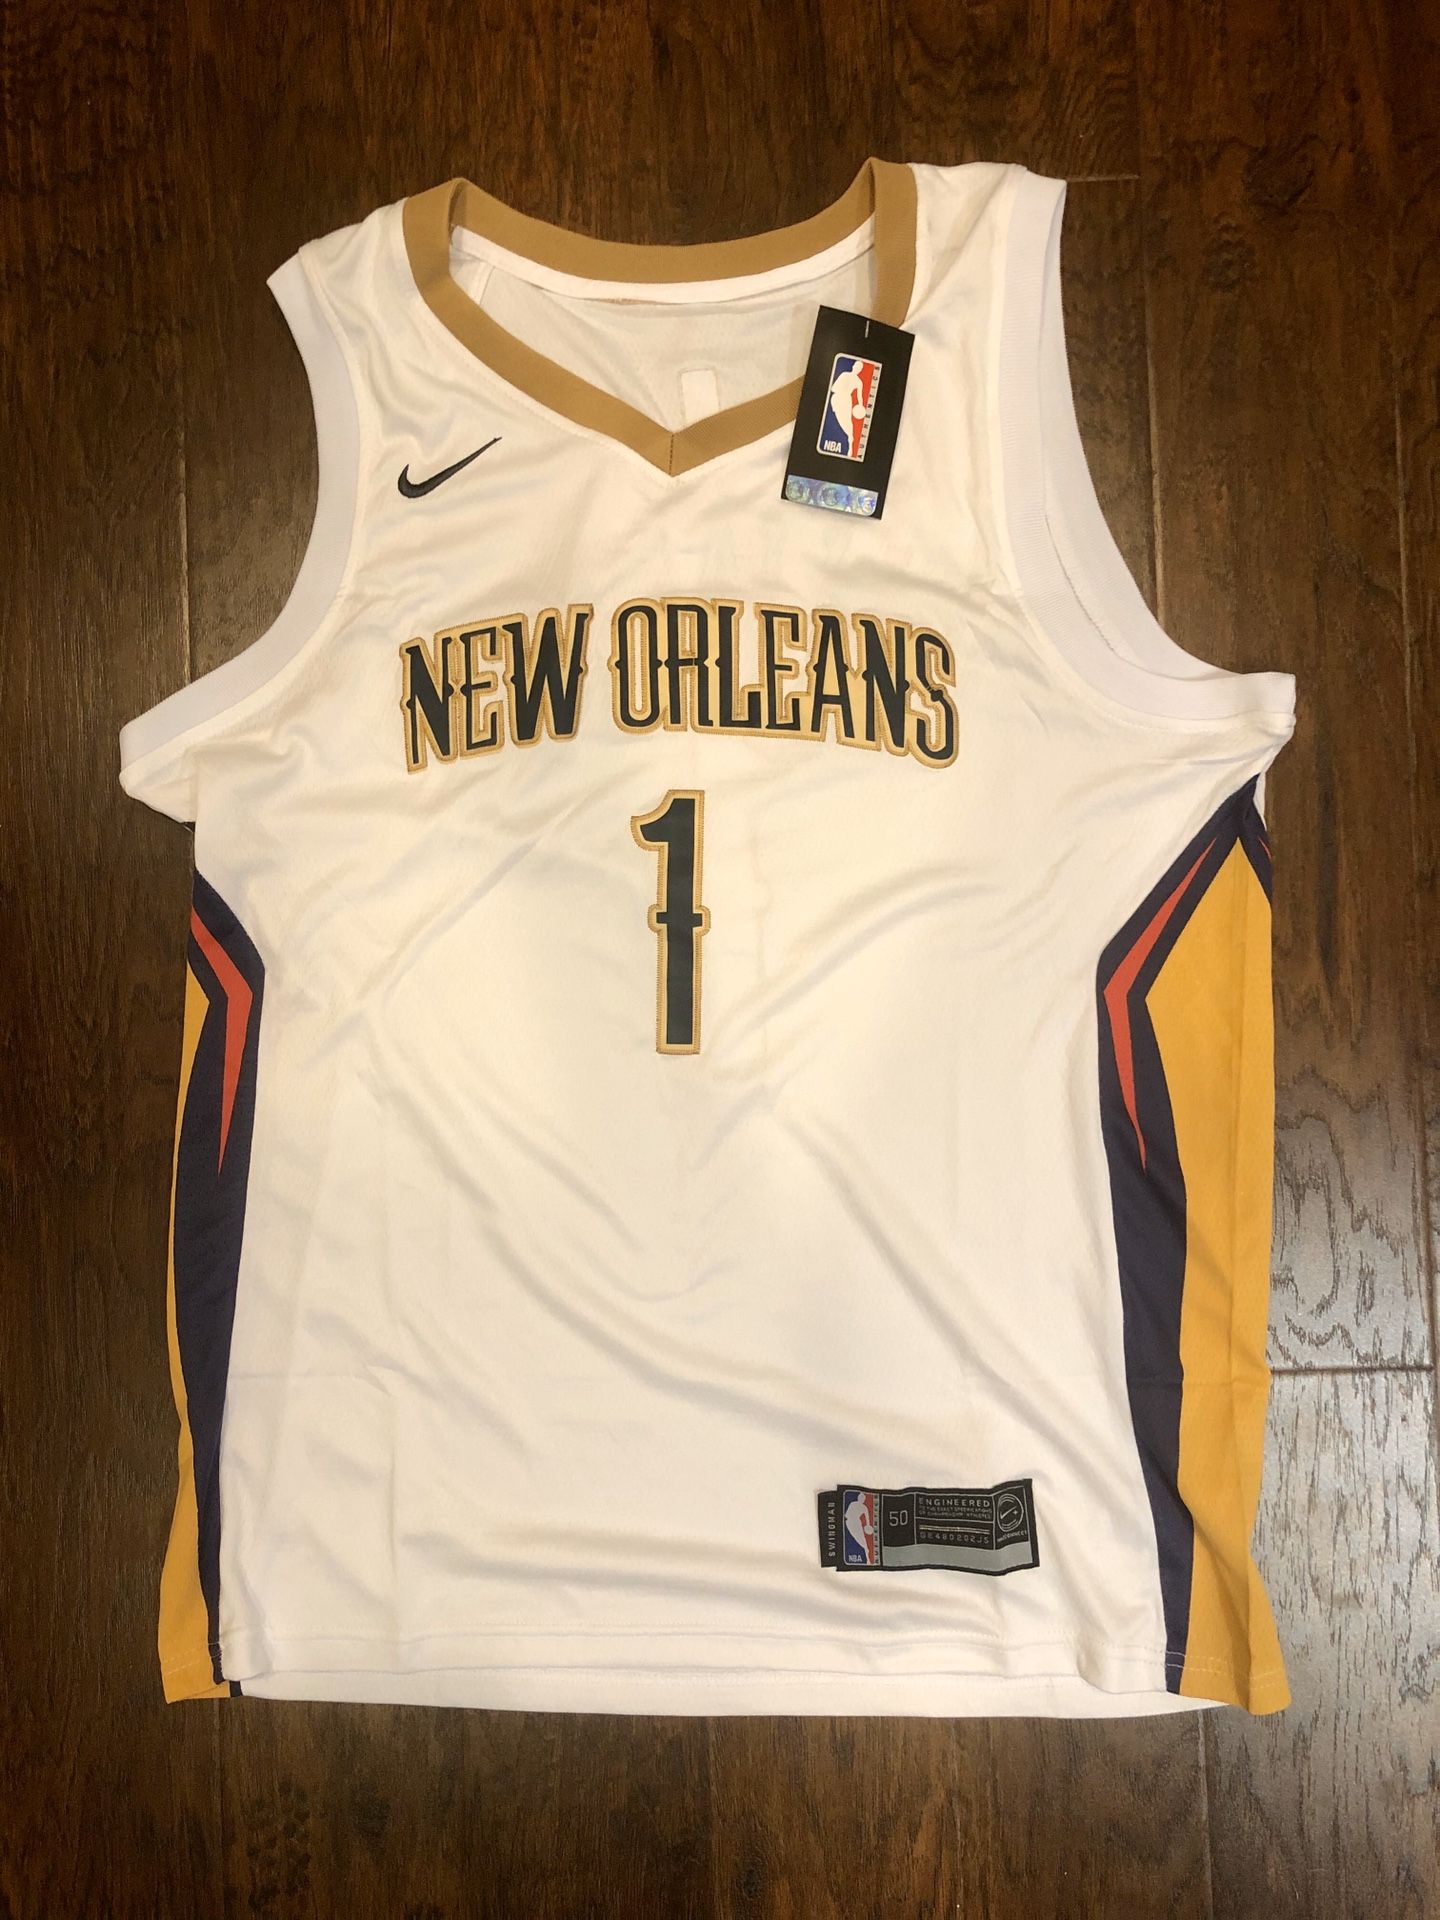 Brand New Zion Williamson New Orleans Pelicans Nike Jersey - Size 50 (Large) - 2019 #1 Draft Pick 🏀